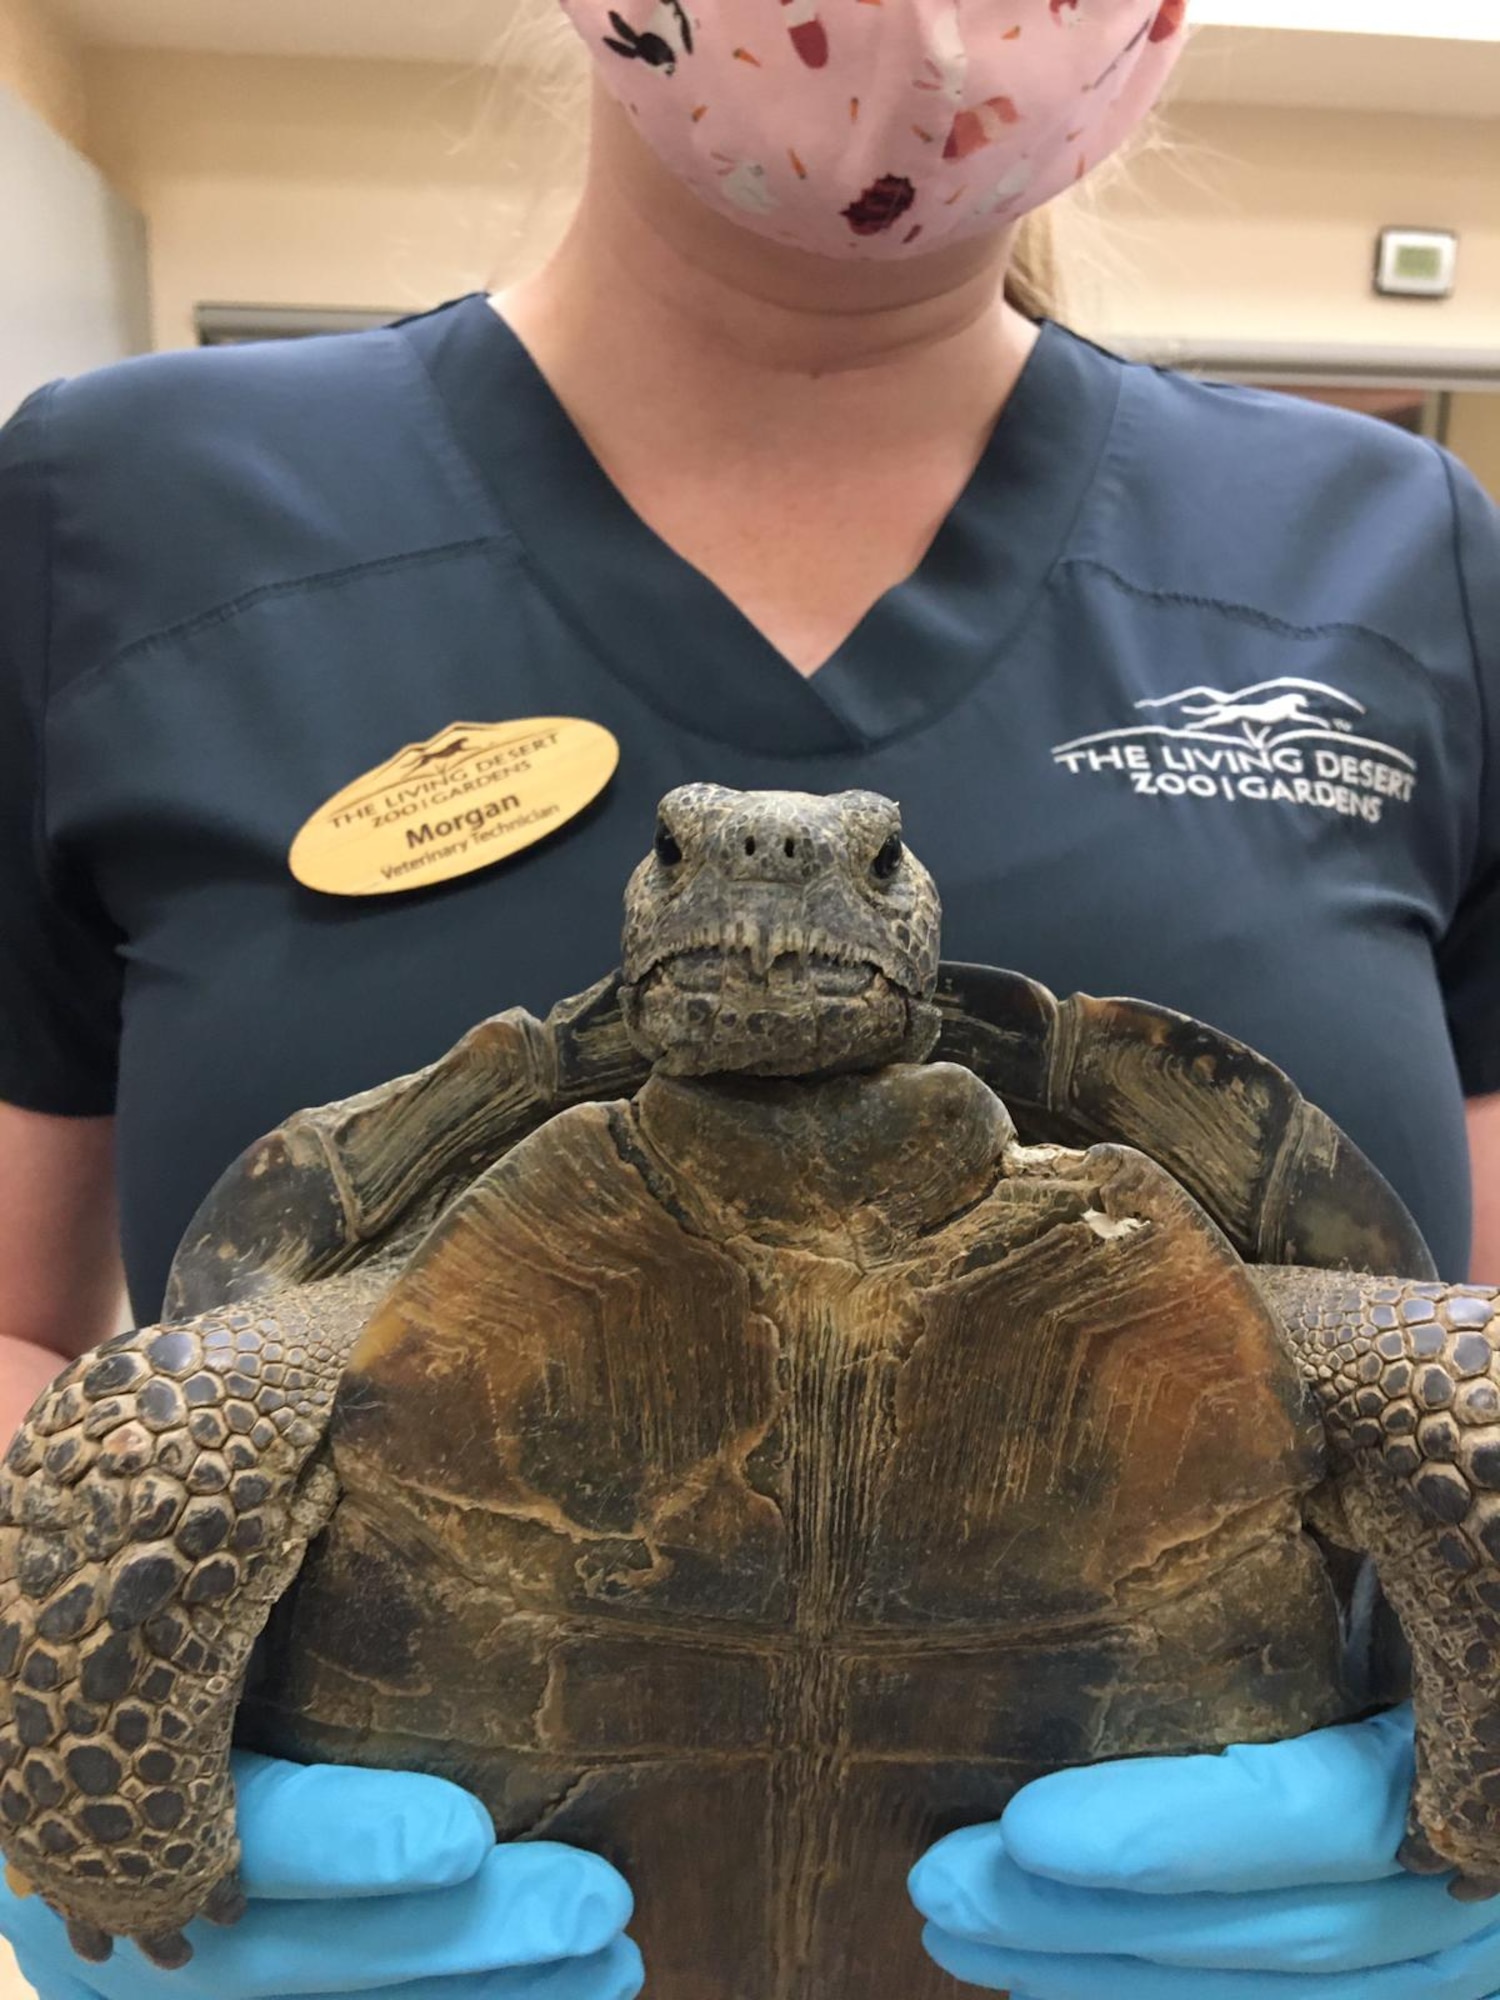 A veterinary technician shows off Kali during her rehabilitative stay at The Living Desert Zoo and Gardens in Palm Desert. Kali was taken there for several months to complete her rehabilitation from injuries she sustained from a collision with a car suffered late last year. (Photo courtesy of The Living Desert Zoo and Gardens)